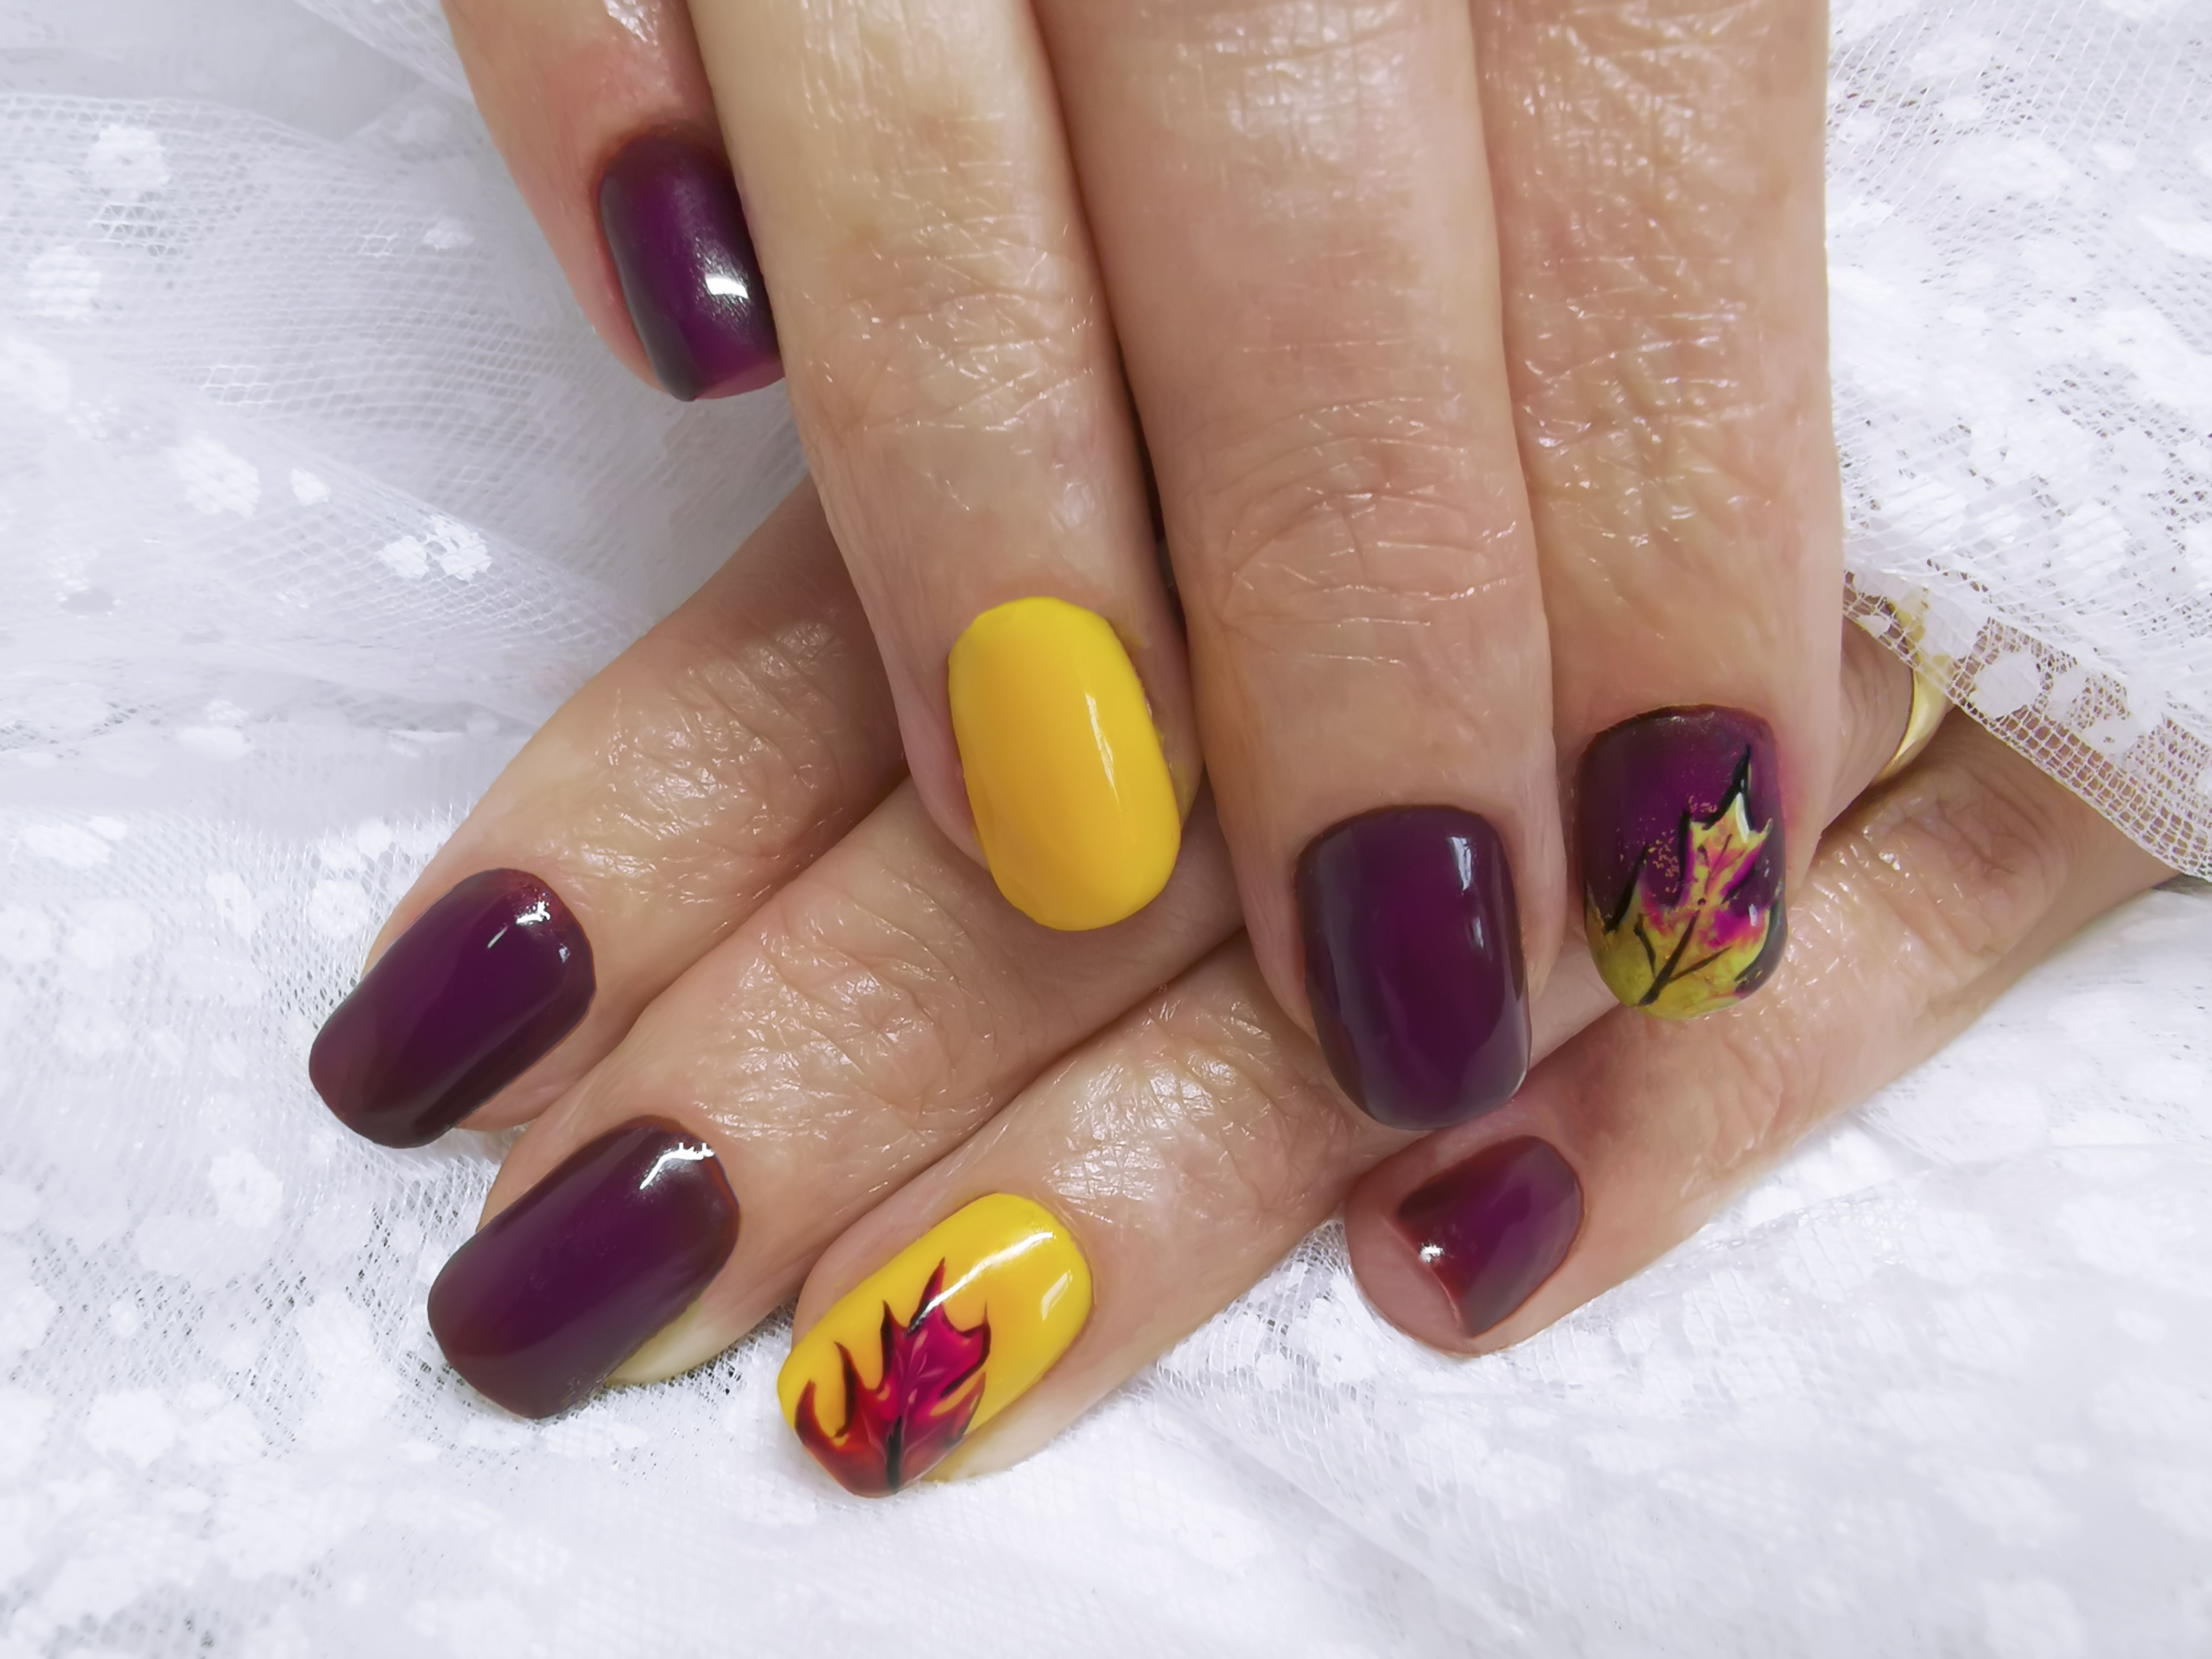 Summer Nail Art 2019 Ideas Guaranteed to Make You a Standout – StyleCaster